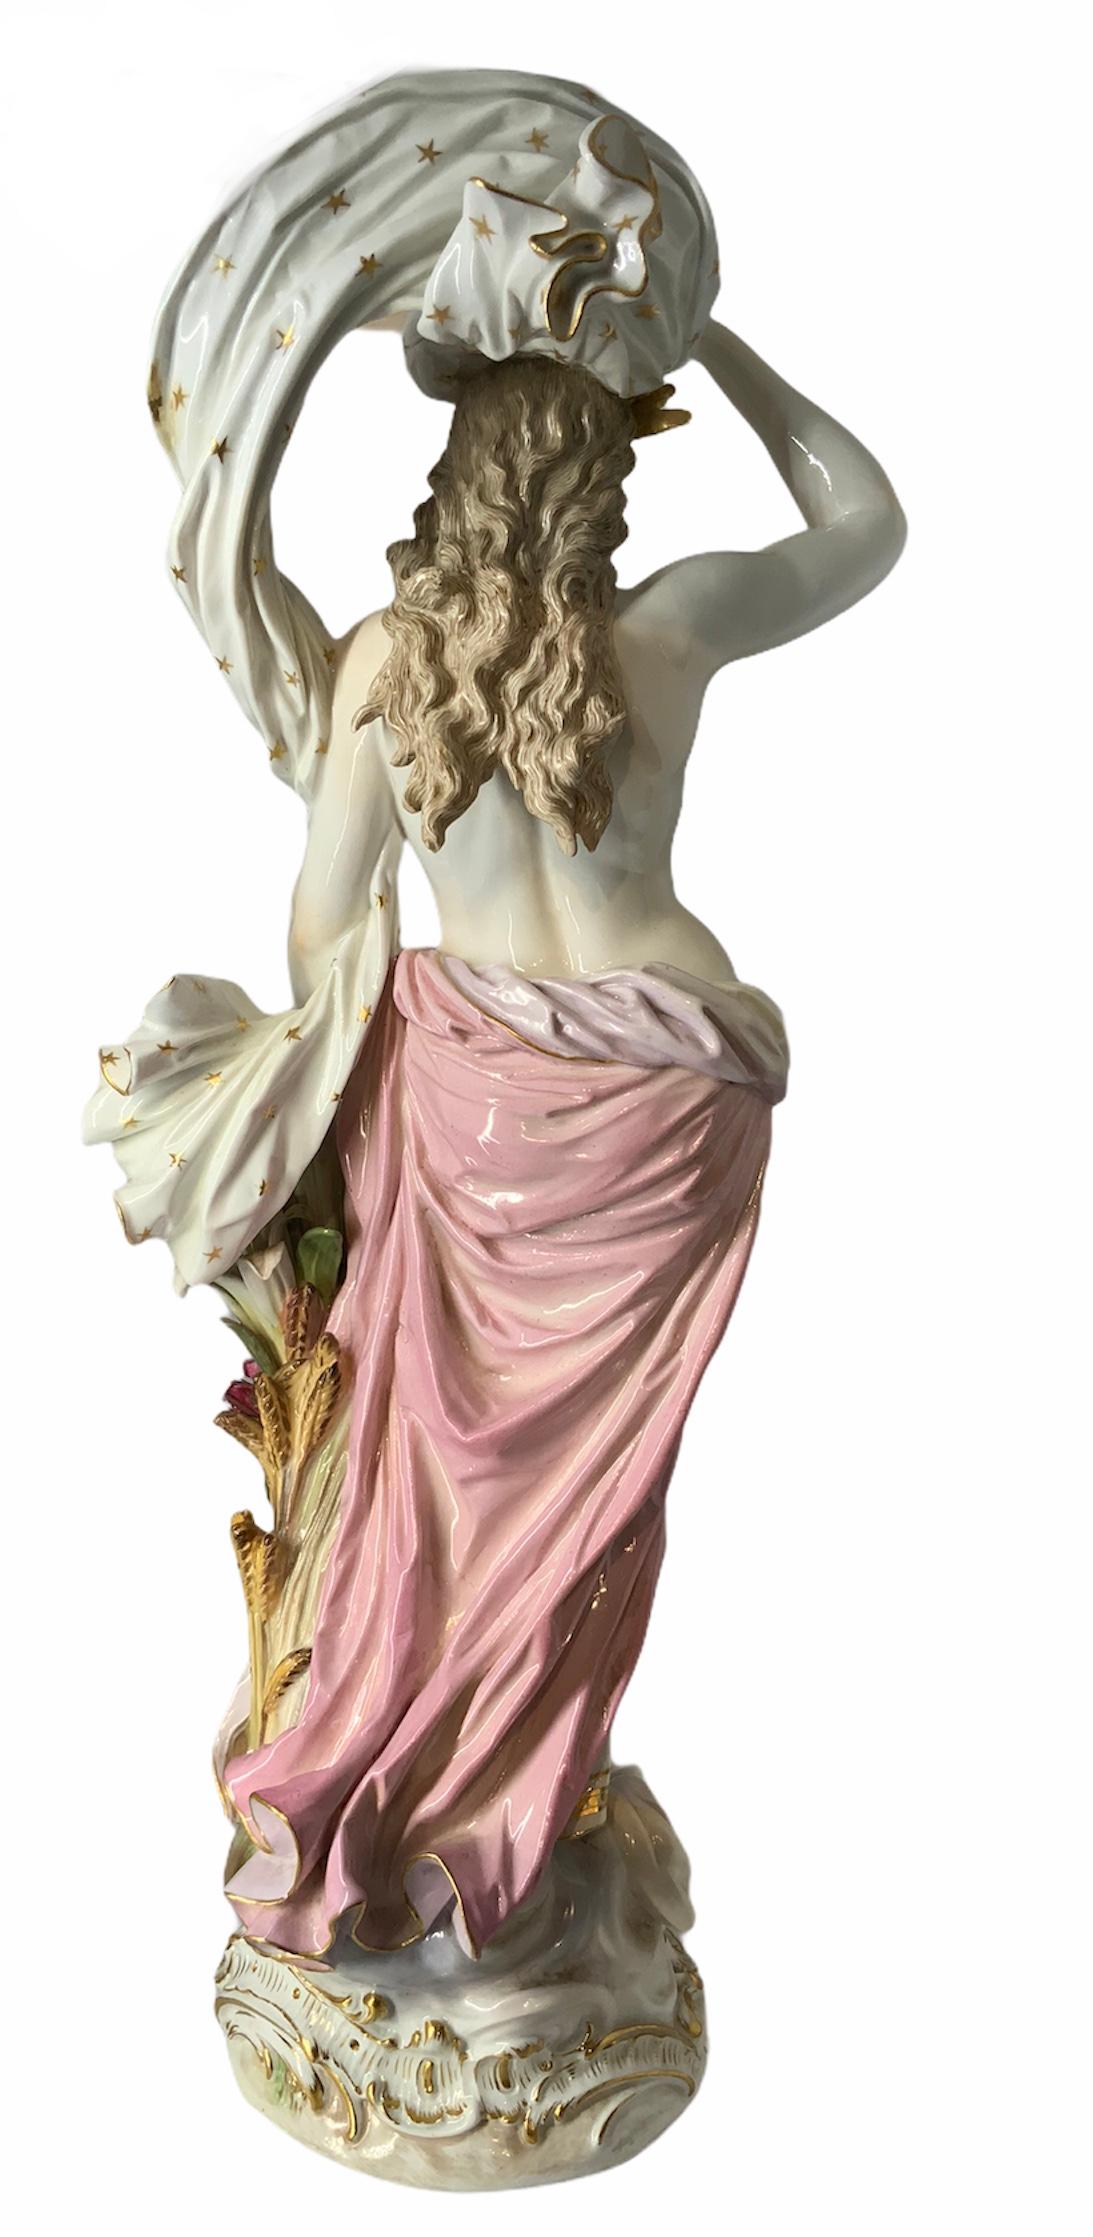 This Meissen porcelain represents a semi nude nymph with a gold crown standing up in victorious posture over a rocaille gilt round base. Beside her, there are a bunch of wheat spikes, iris and roses flowers. She features a bare torso and a pink and